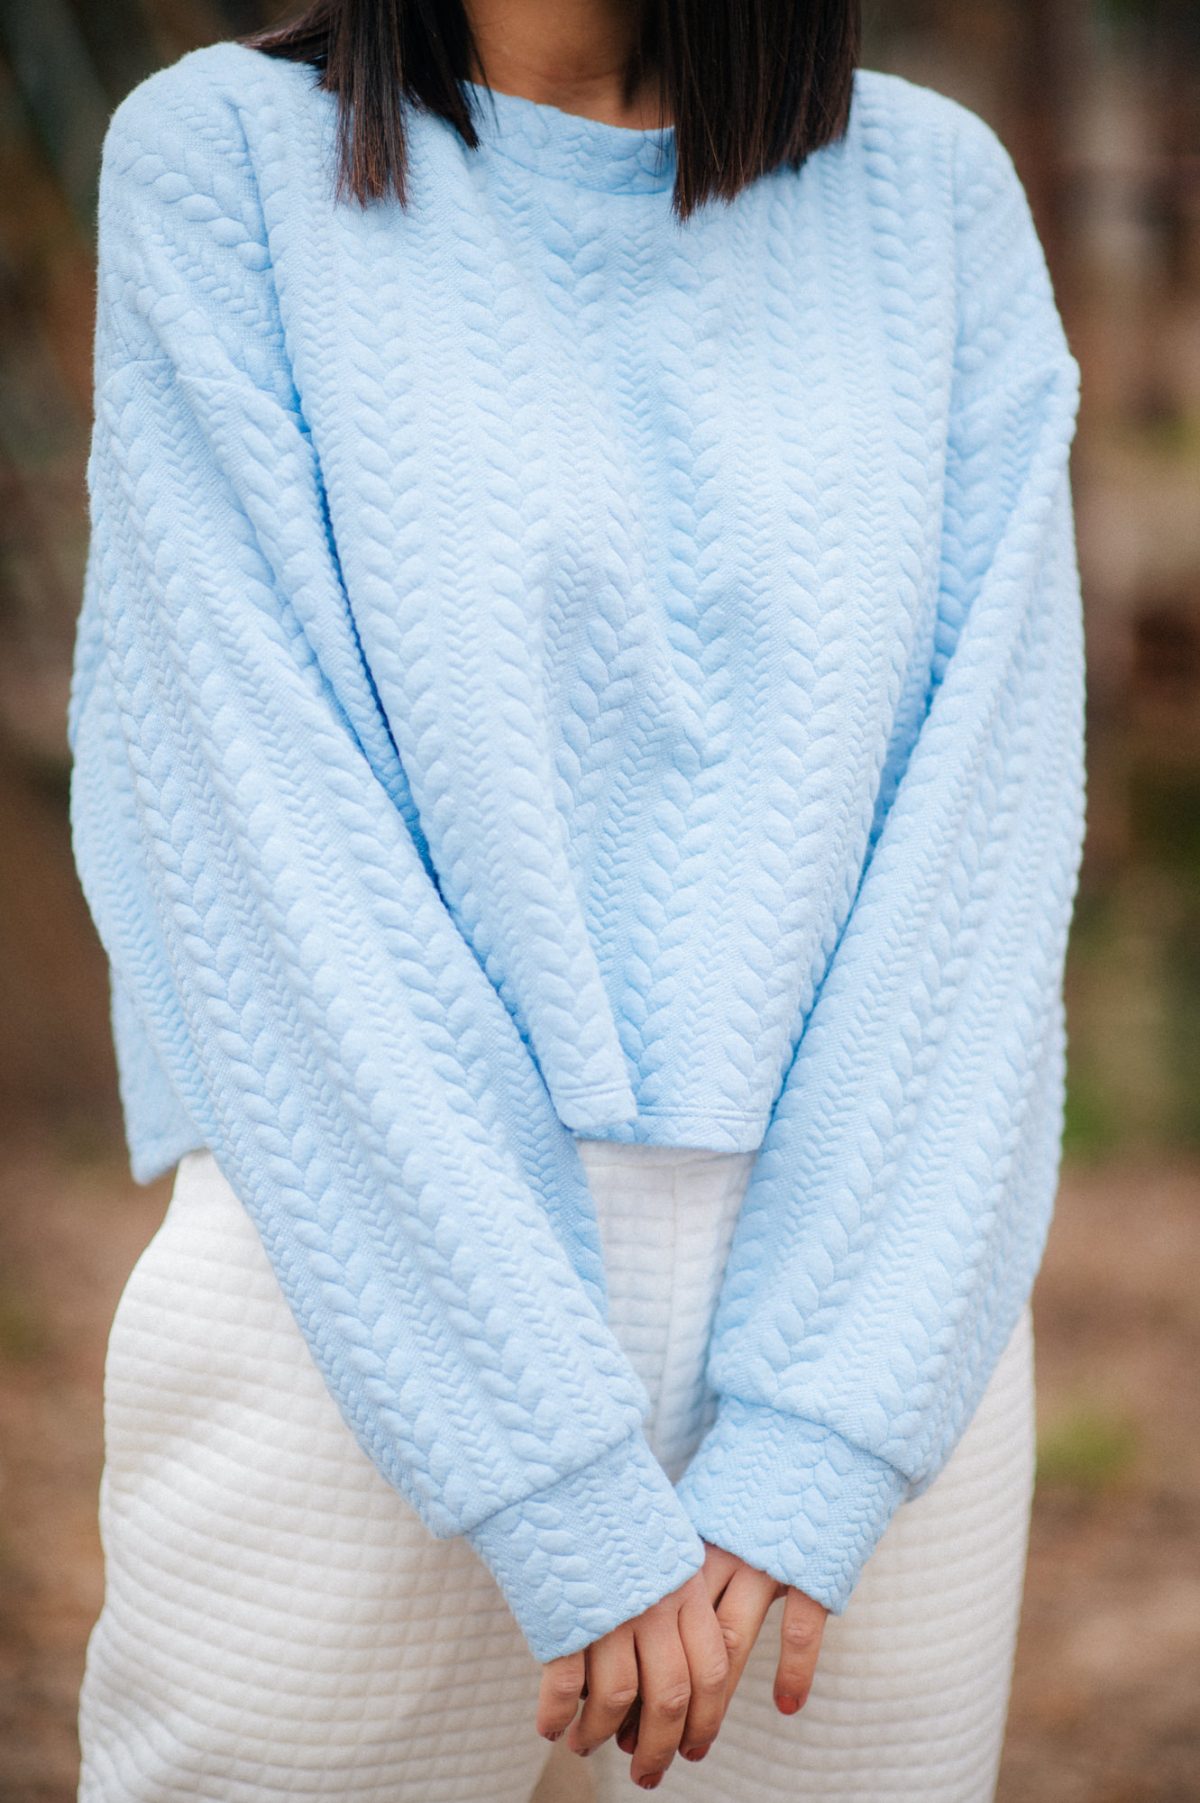 Quilted Sweatshirt Blouse with Braid Design in light blue